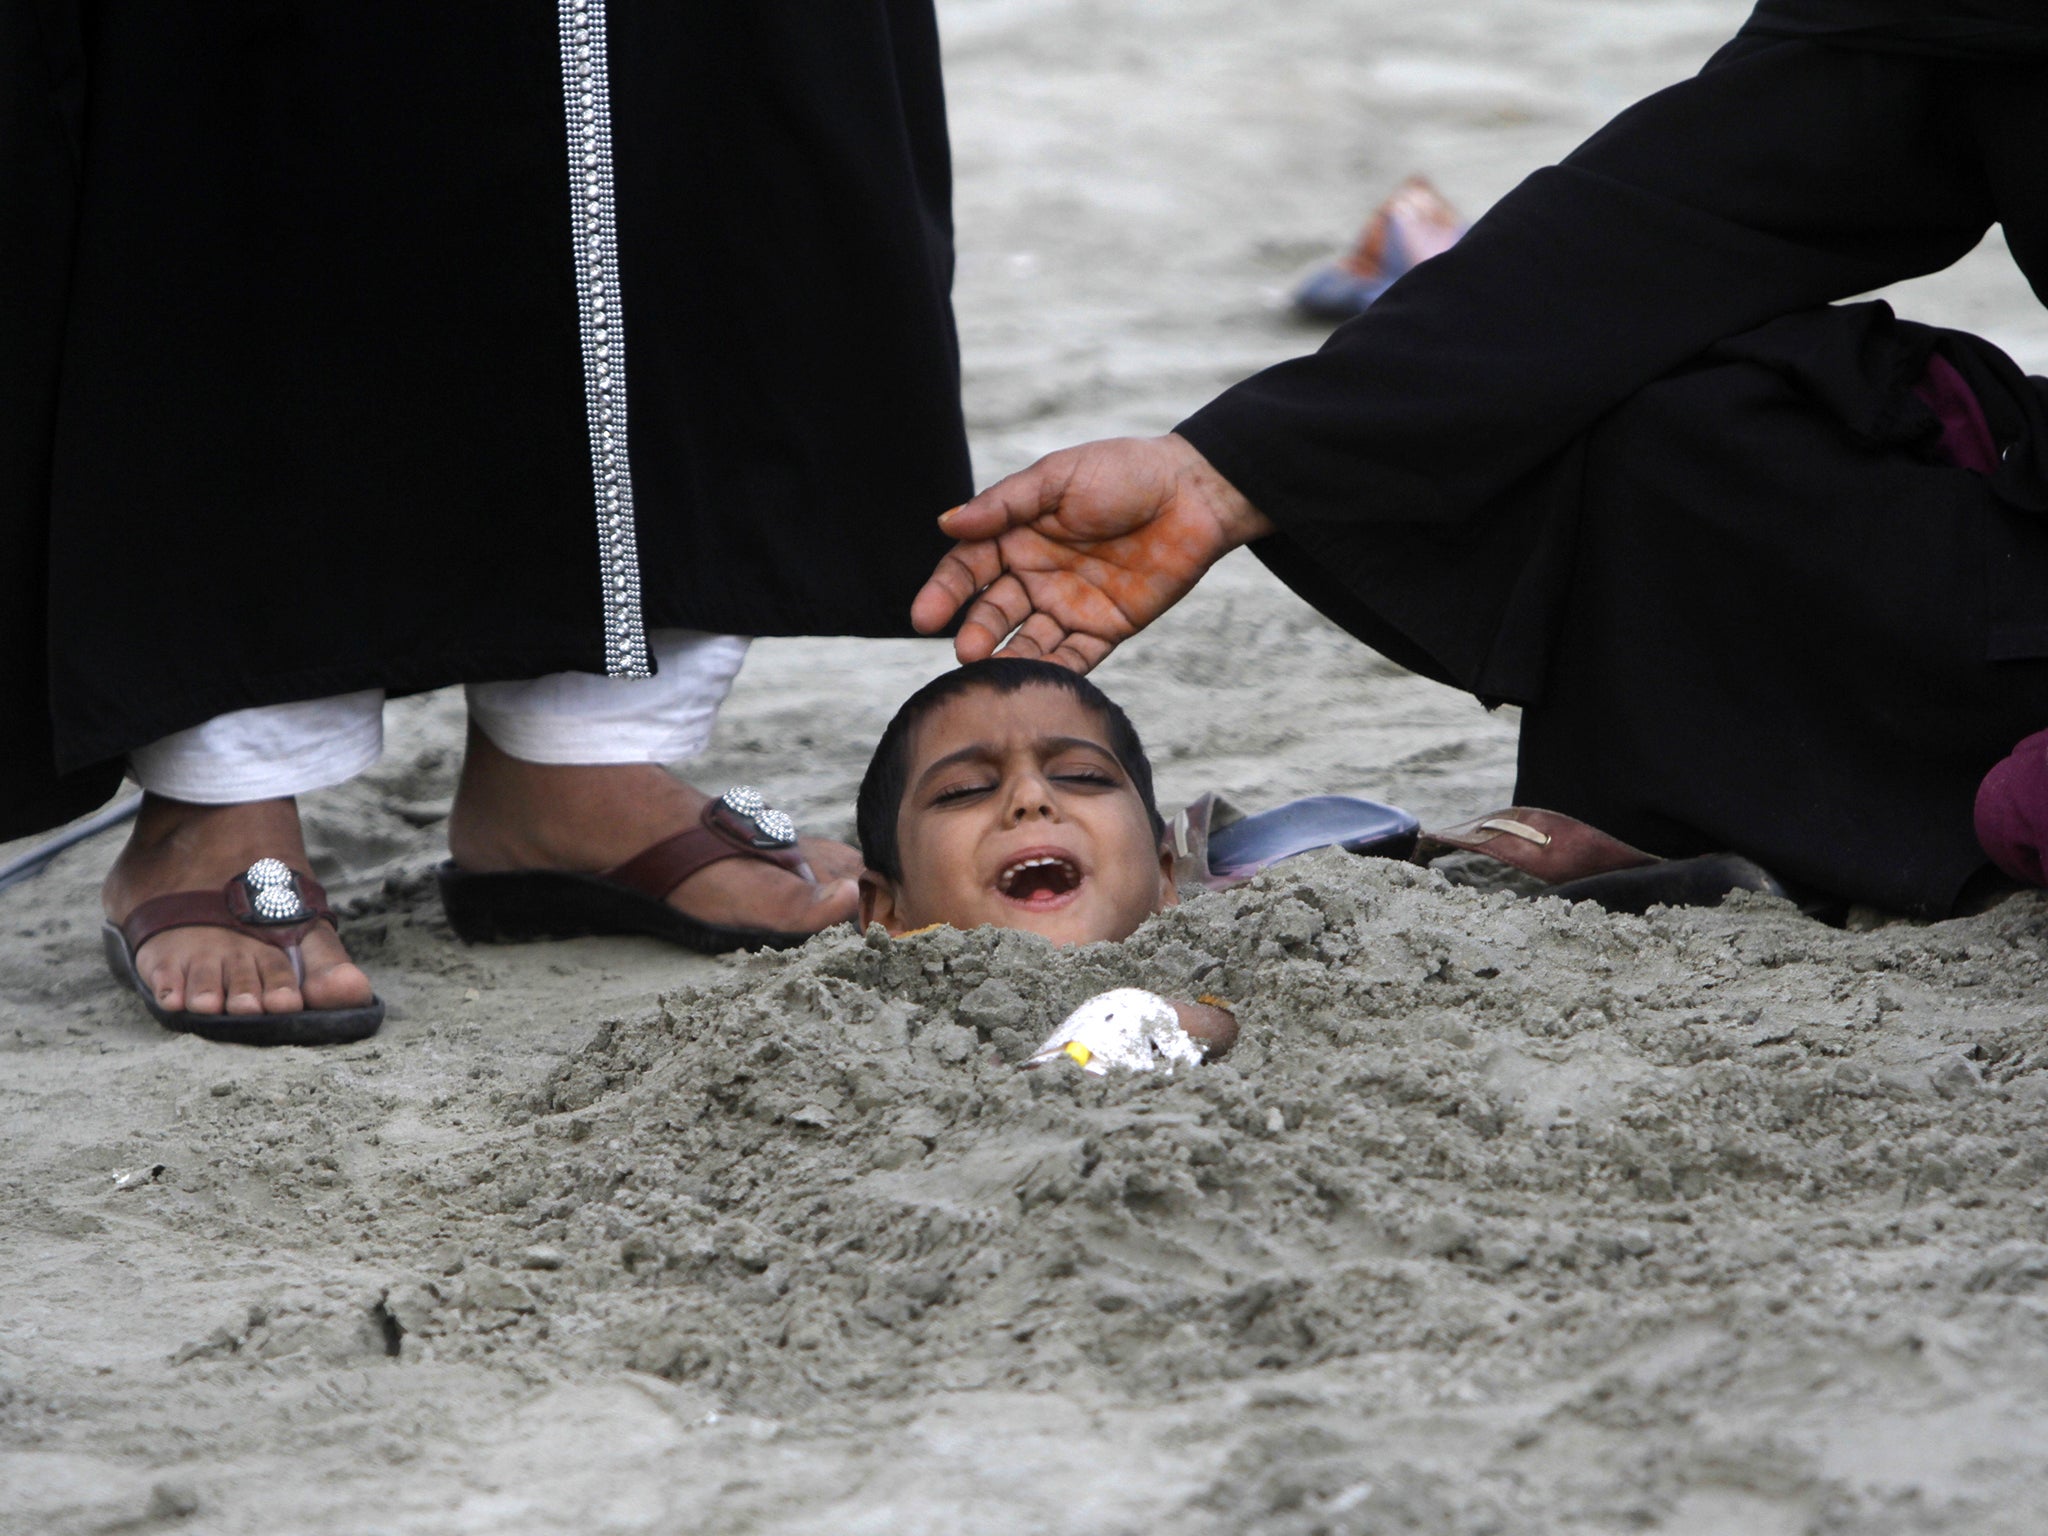 A woman places her hand on her son's head as he lies buried in sand up to his neck during a partial solar eclipse at Karachi's Clifton beach January 4, 2011. Yasir, a seven-year-old handicapped boy, joined people with disabilities who were buried chest-deep during the partial solar eclipse on Tuesday, as part of a traditional superstition that it would bring healing to their bodies